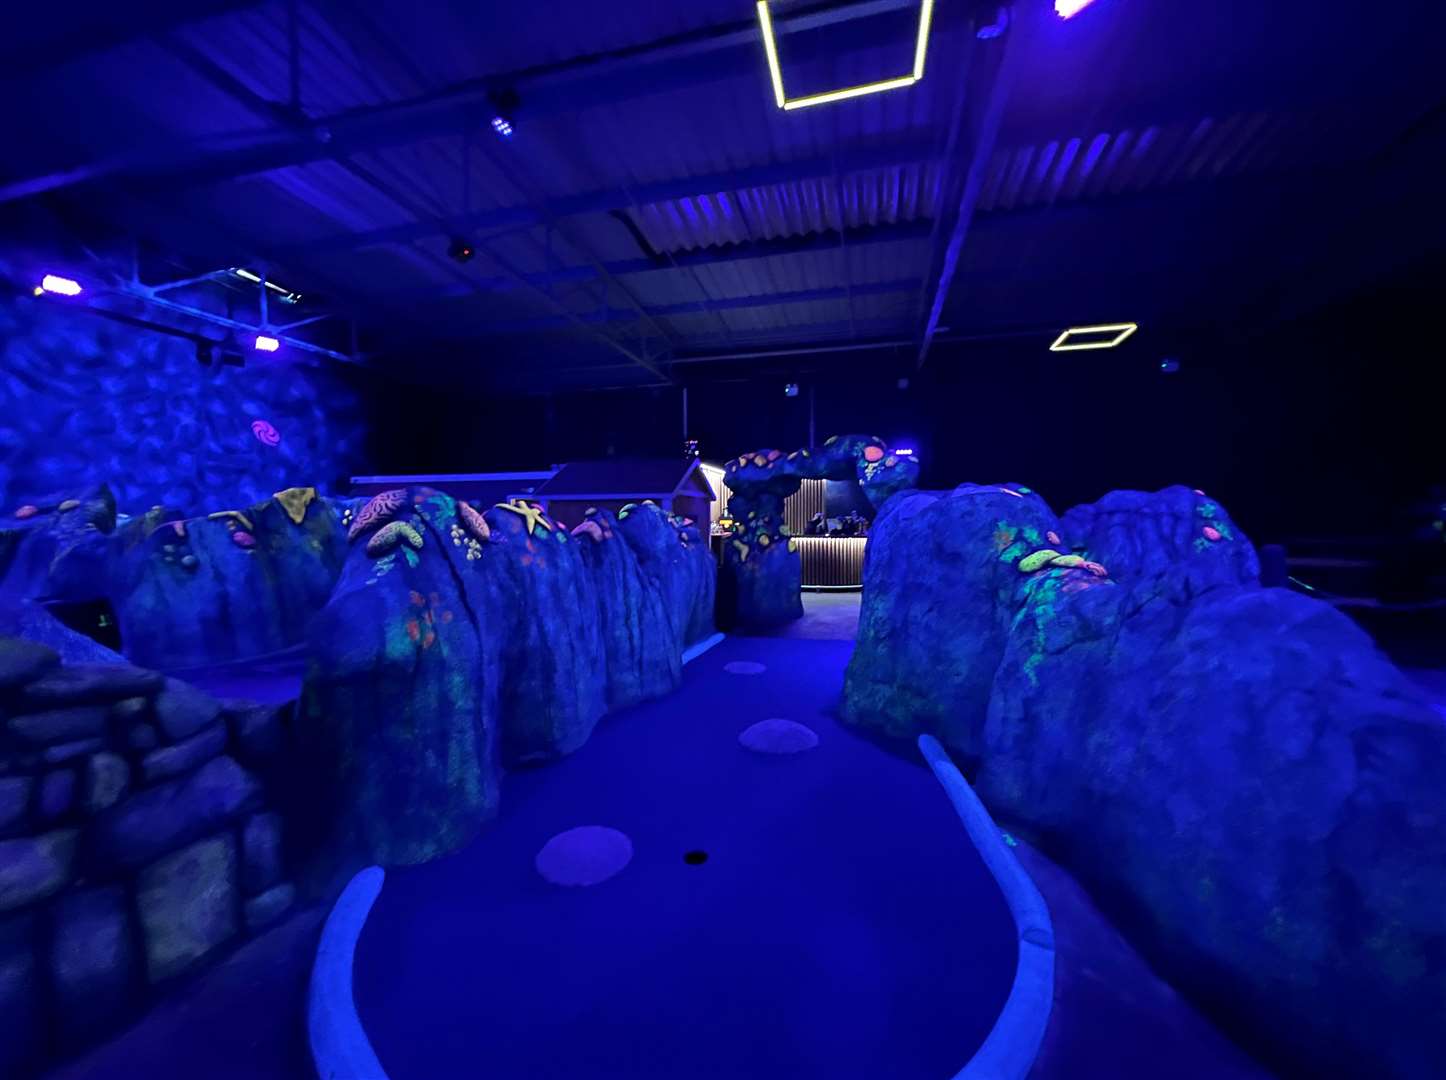 The crazy golf venue has proven popular since opening last year